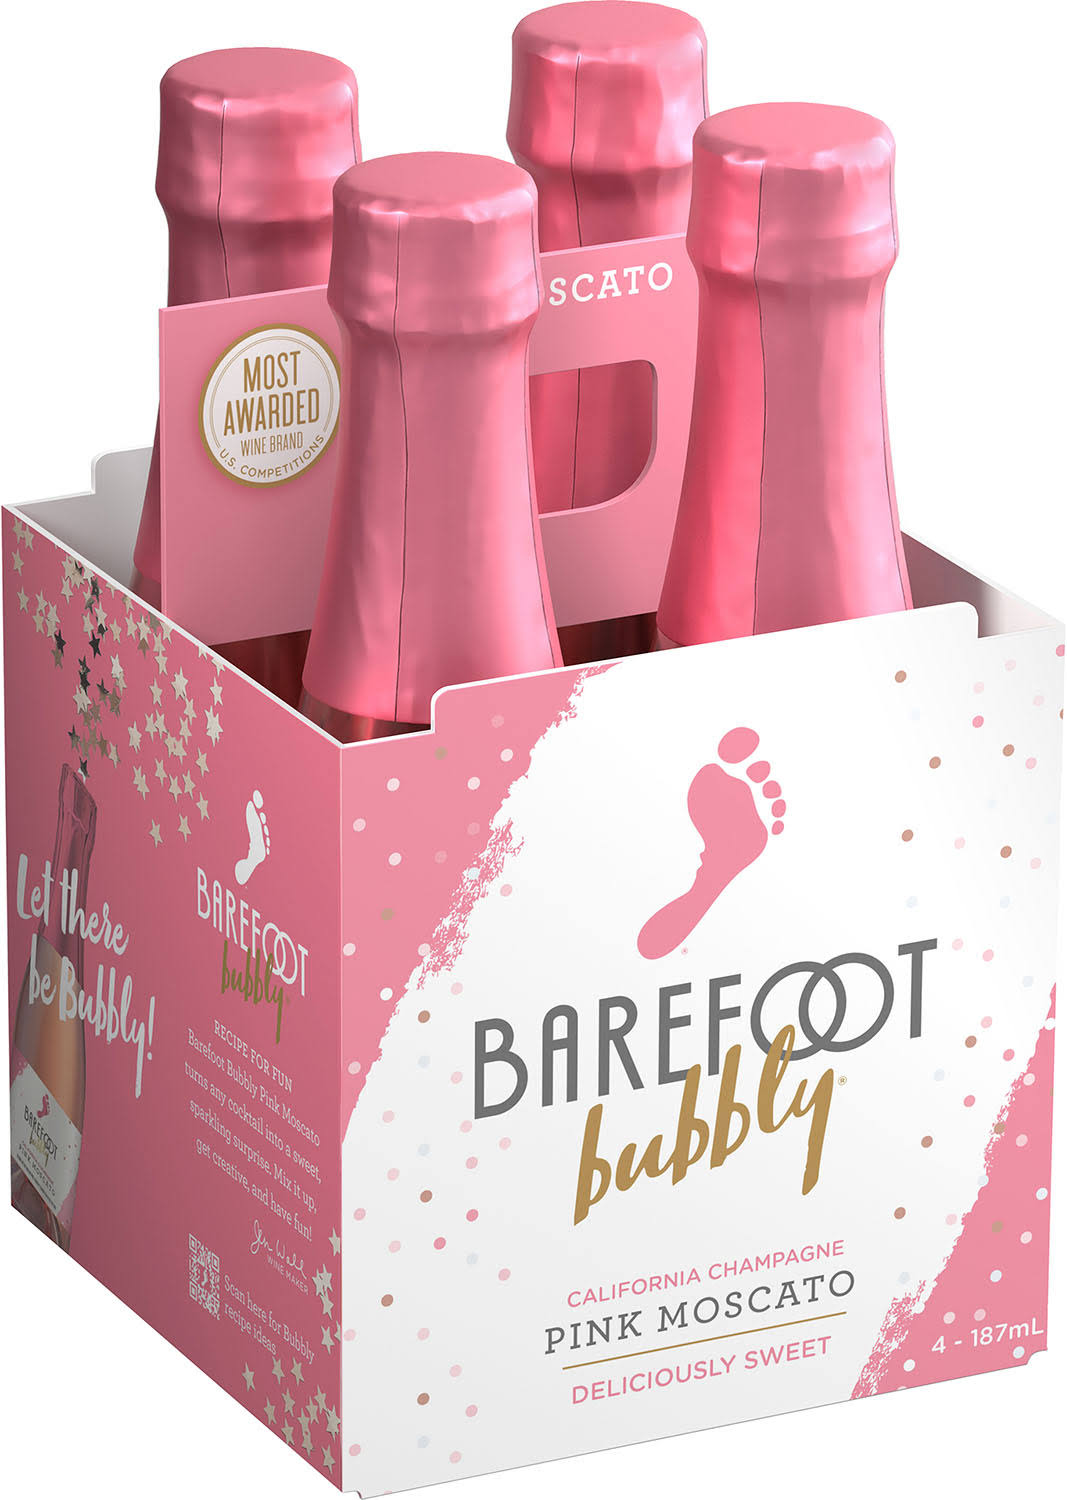 Barefoot Bubbly Pink Moscato - 187ml, 4 Pack